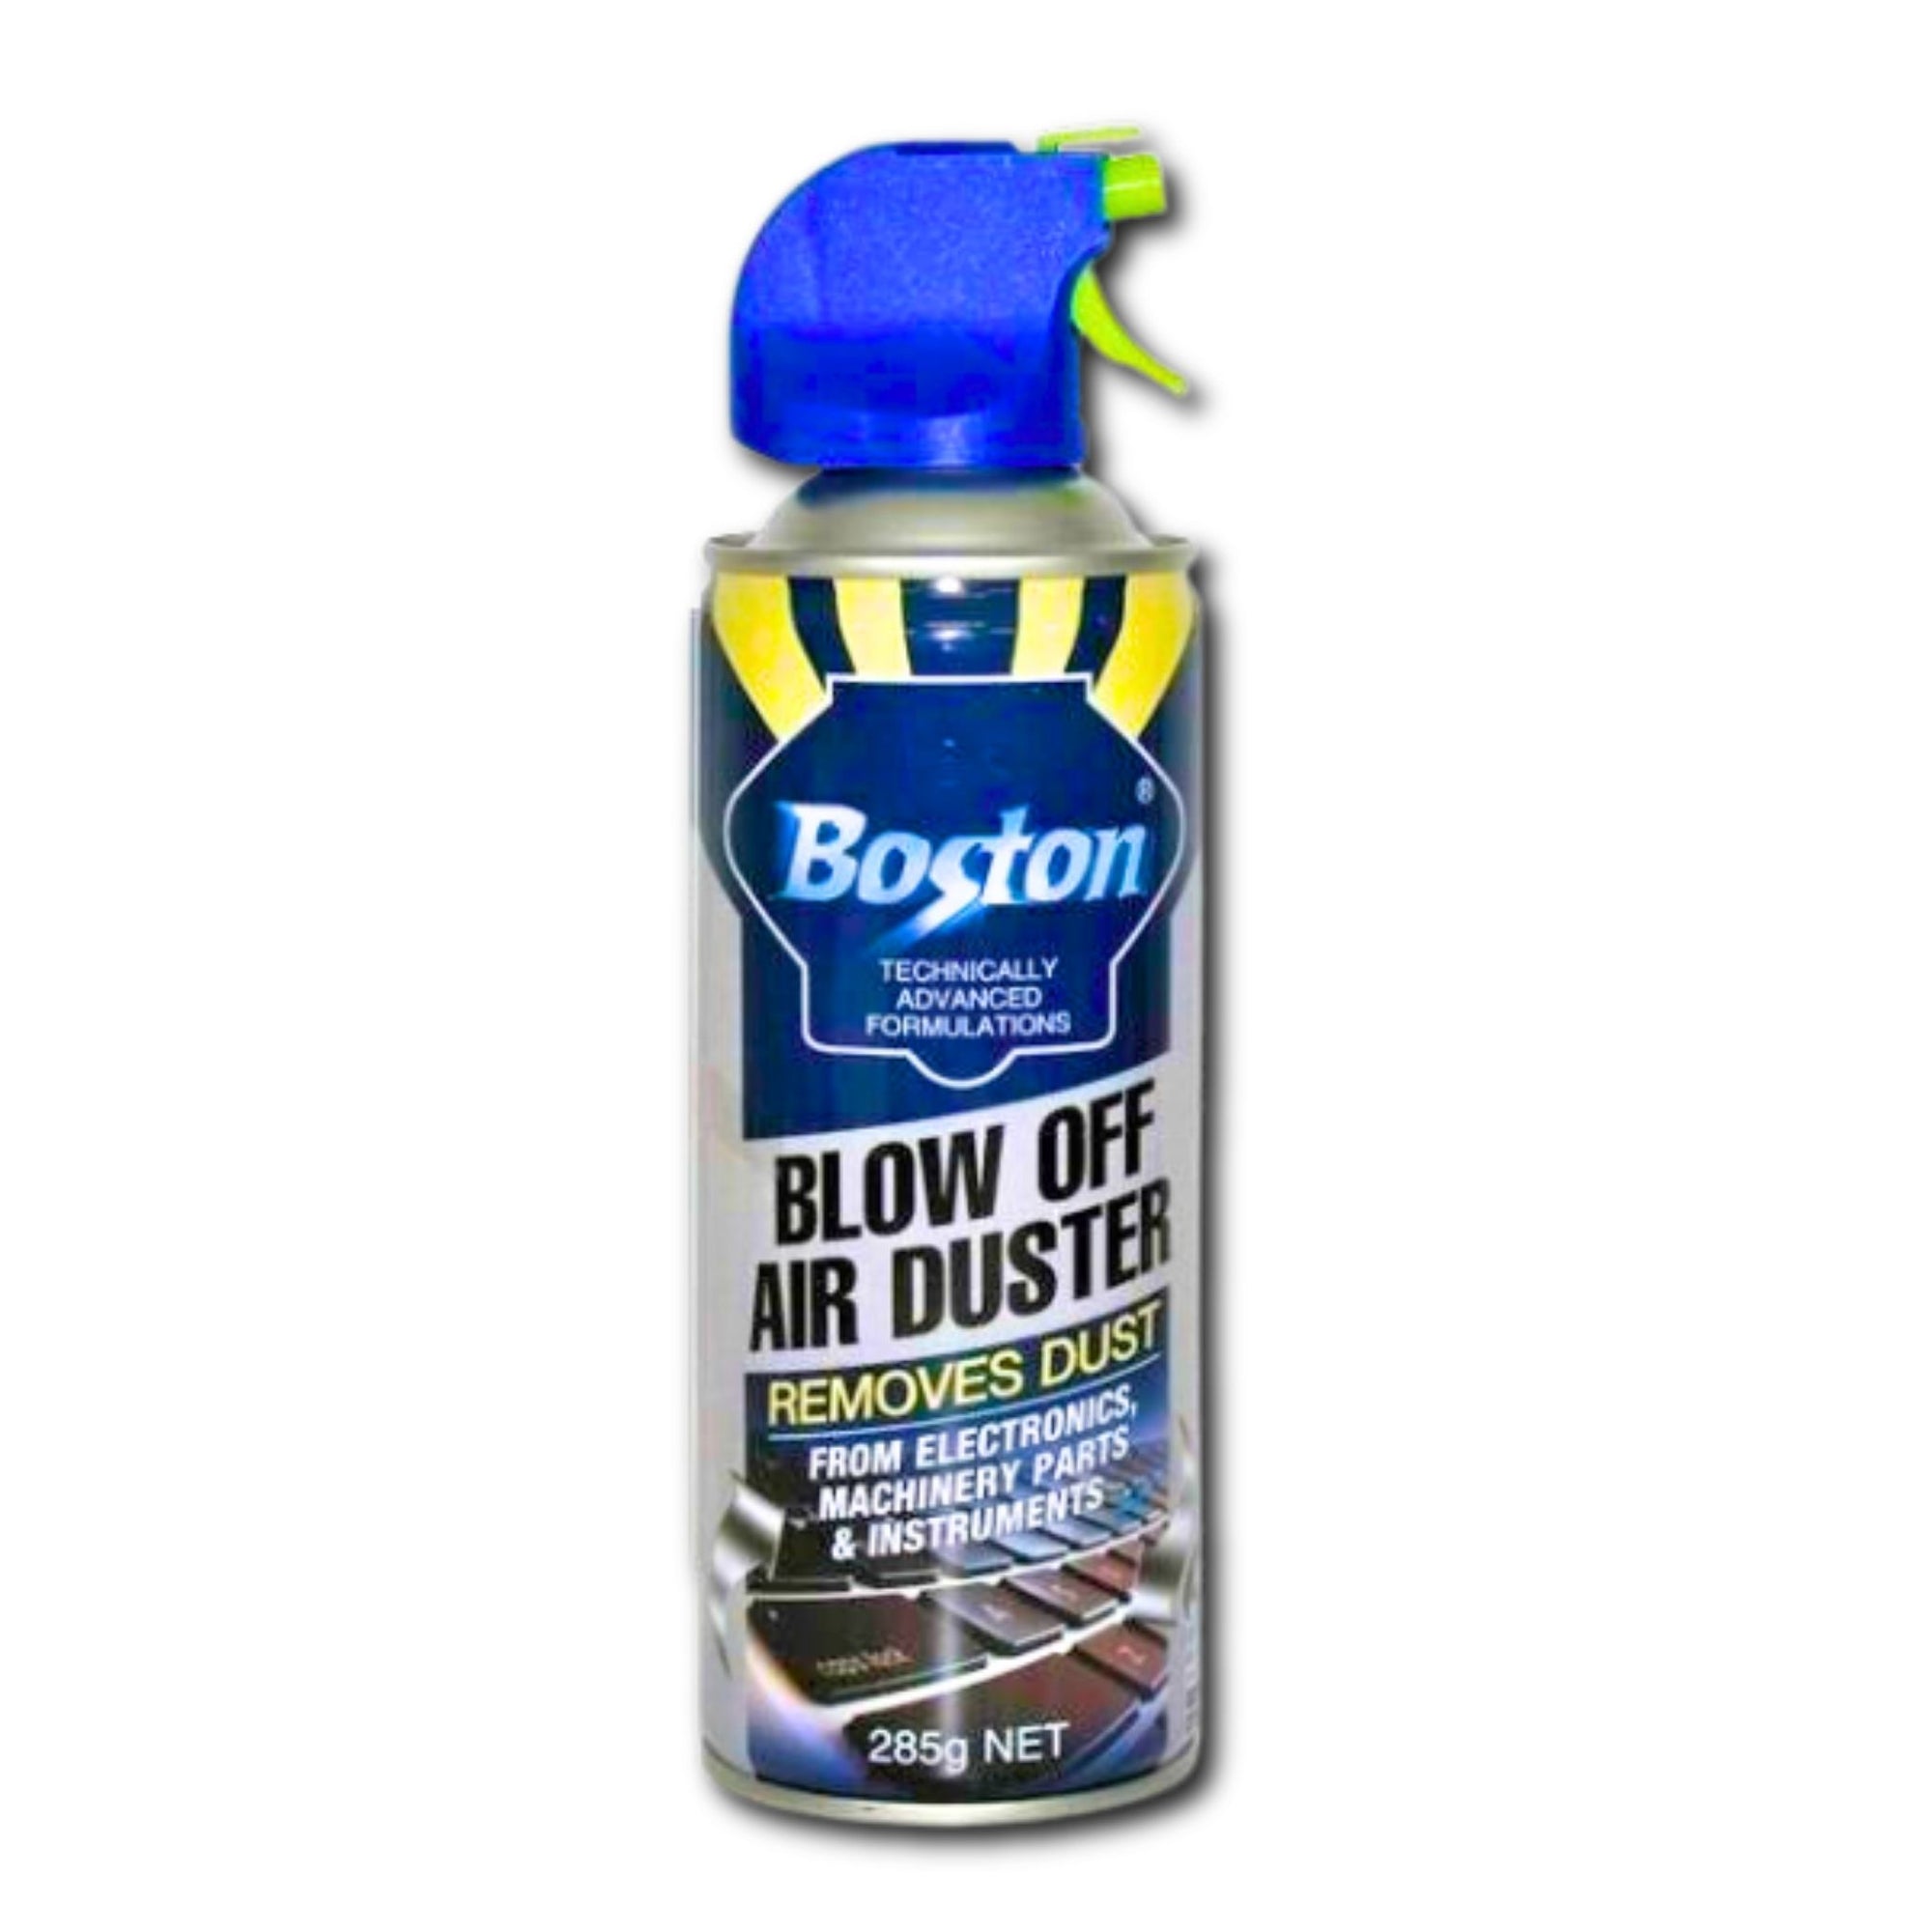 Boston Blow off Air Duster Removes Dust | 78691 | 285g - South East Clearance Centre